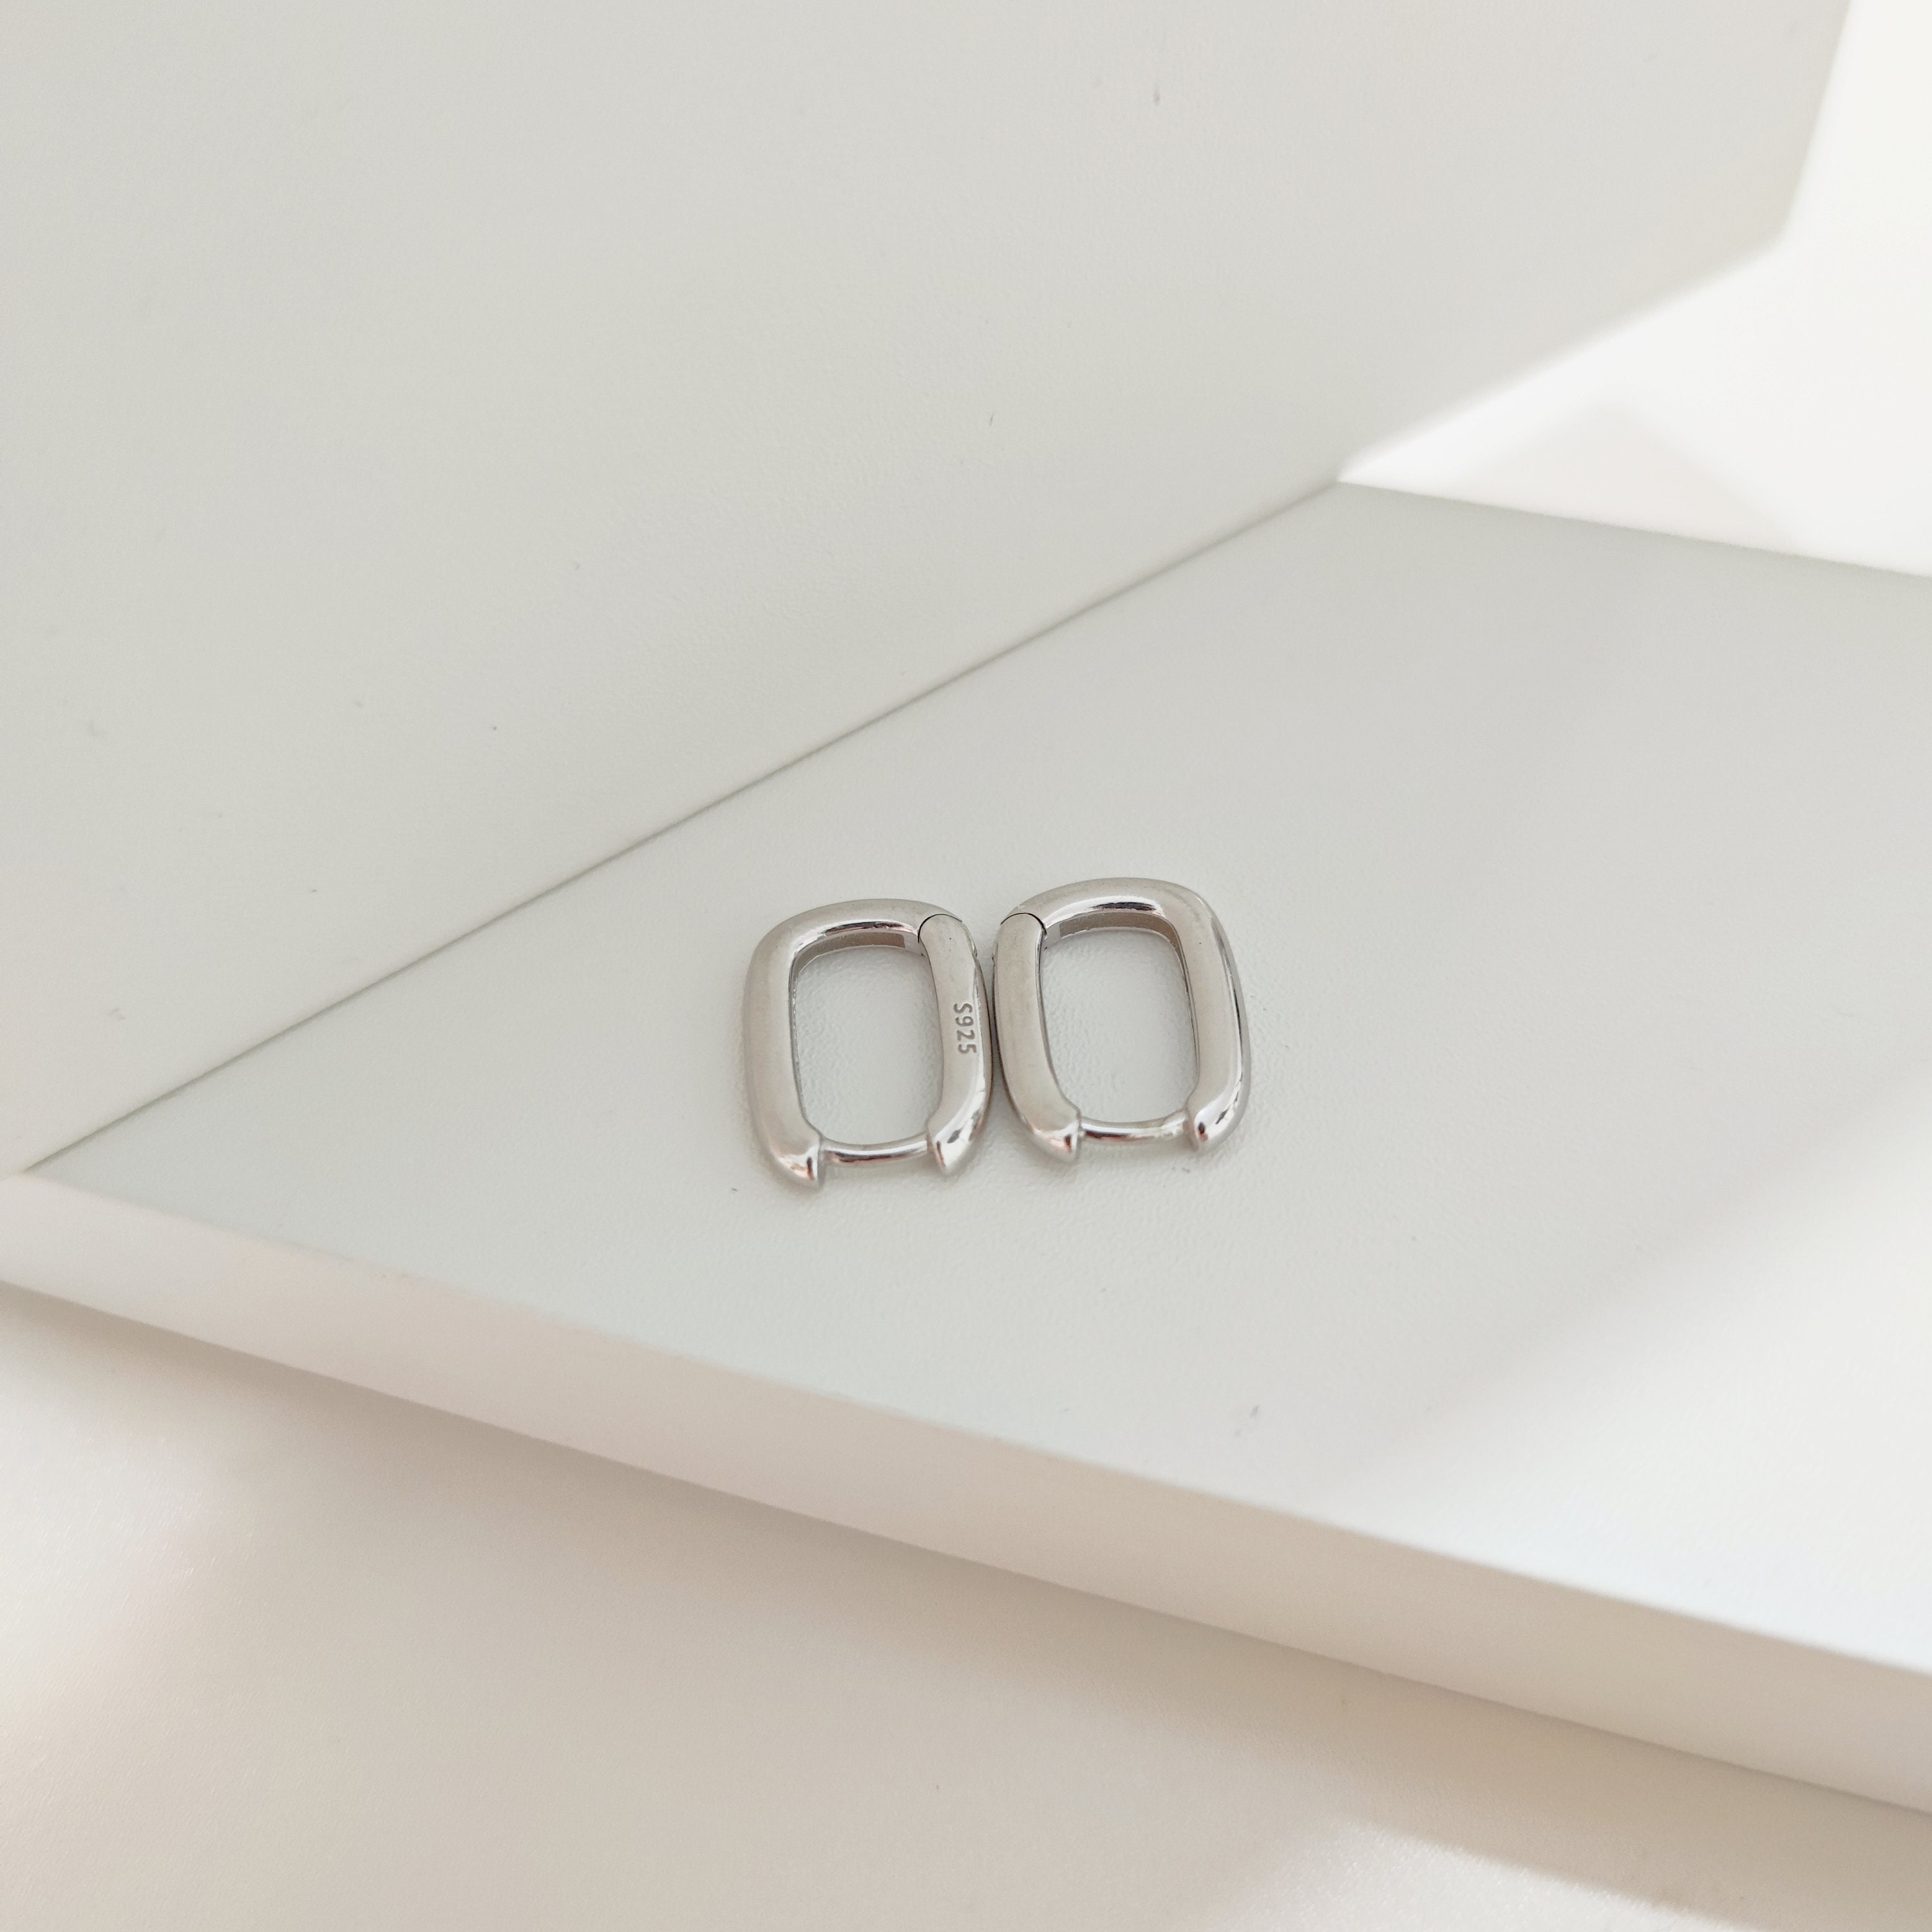 Earrings, Sterling Silver for Chunky Her Rectangular Square Gift Etsy Oval - Small Hoop Gold, or Israel Dainty Jewelry Earrings, Silver Hoop Earrings,